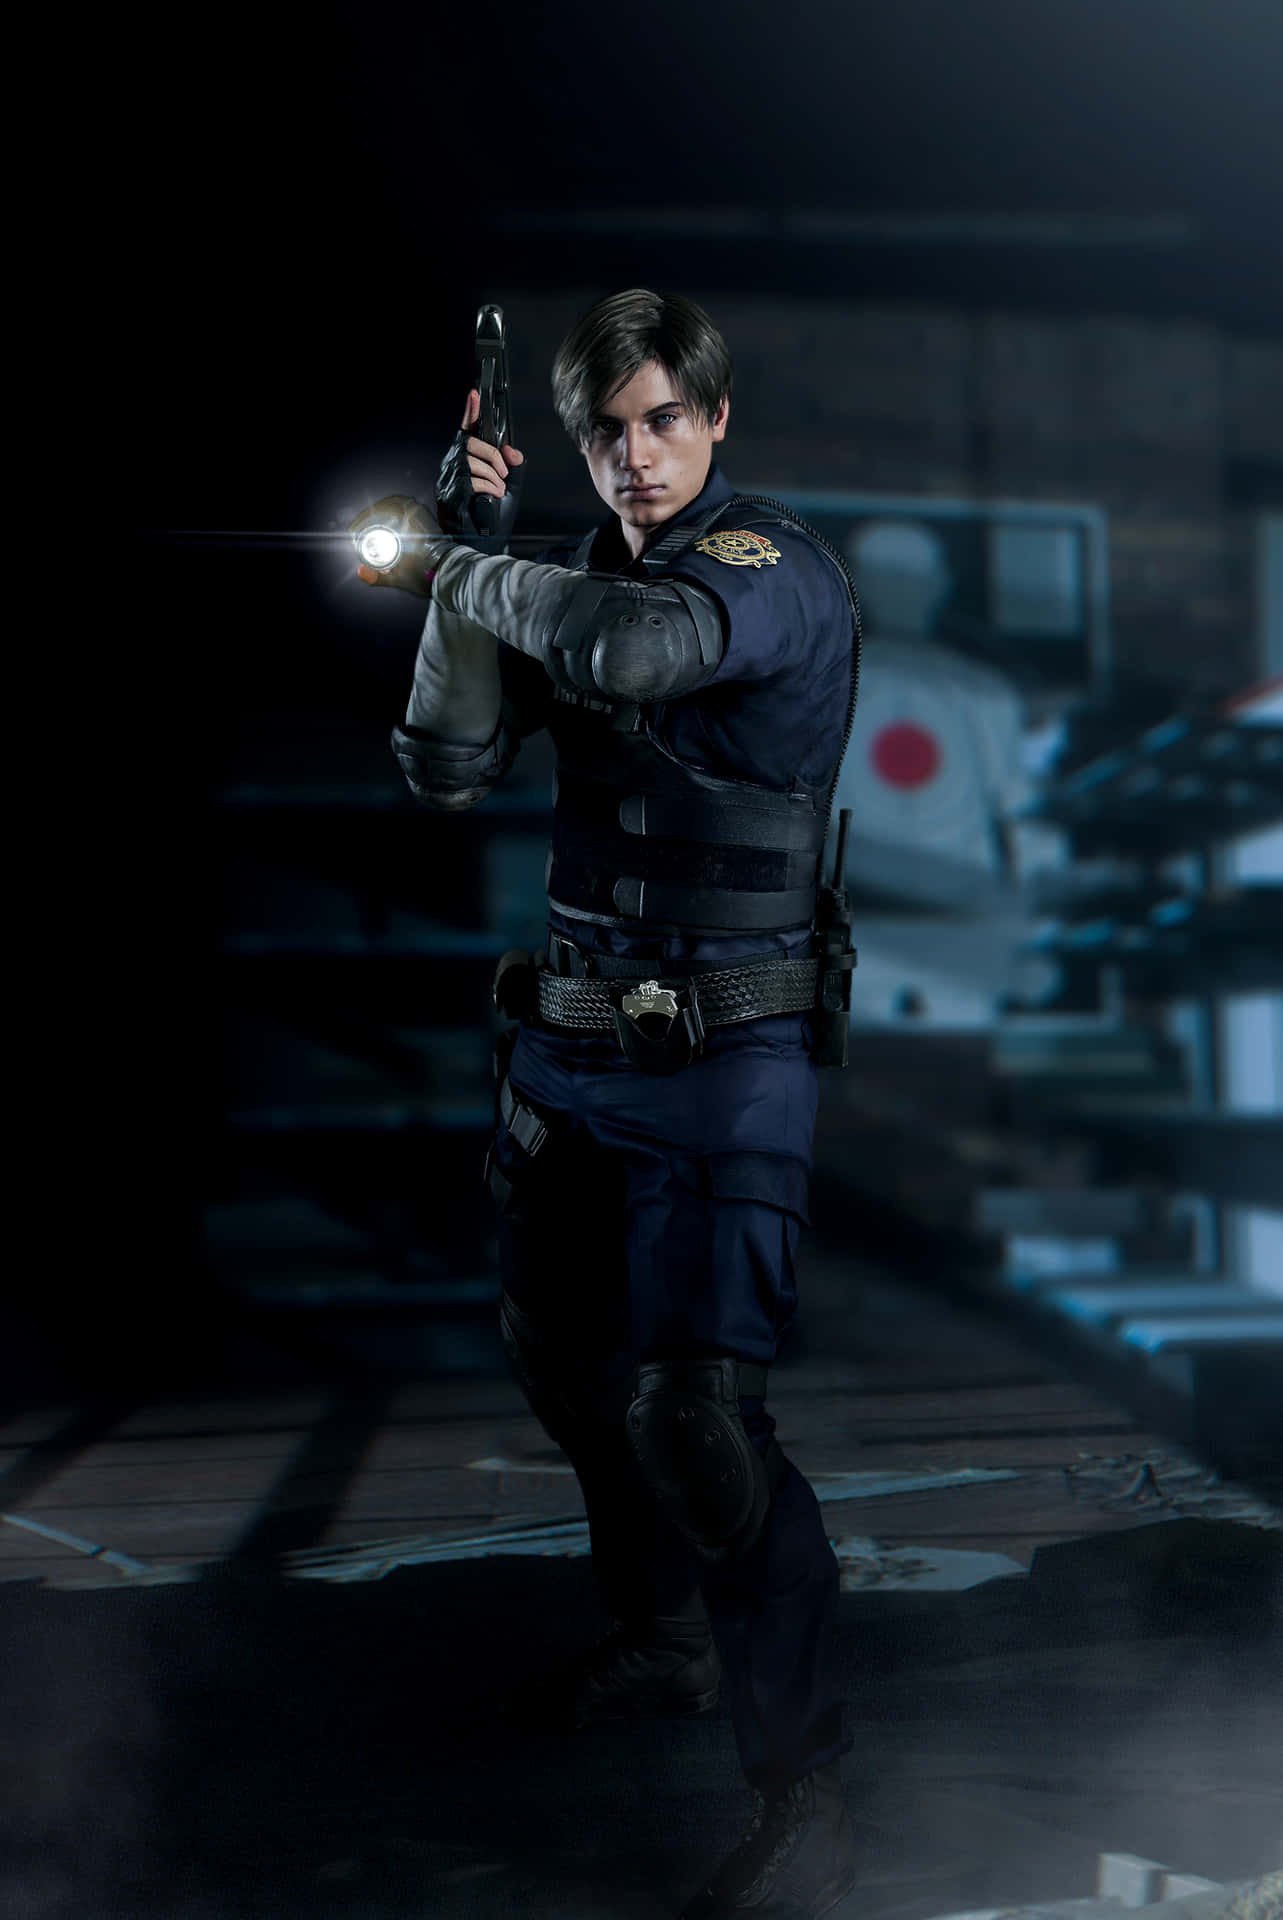 Leon Kennedy Comes Alive in the Remake of Resident Evil 2 Wallpaper